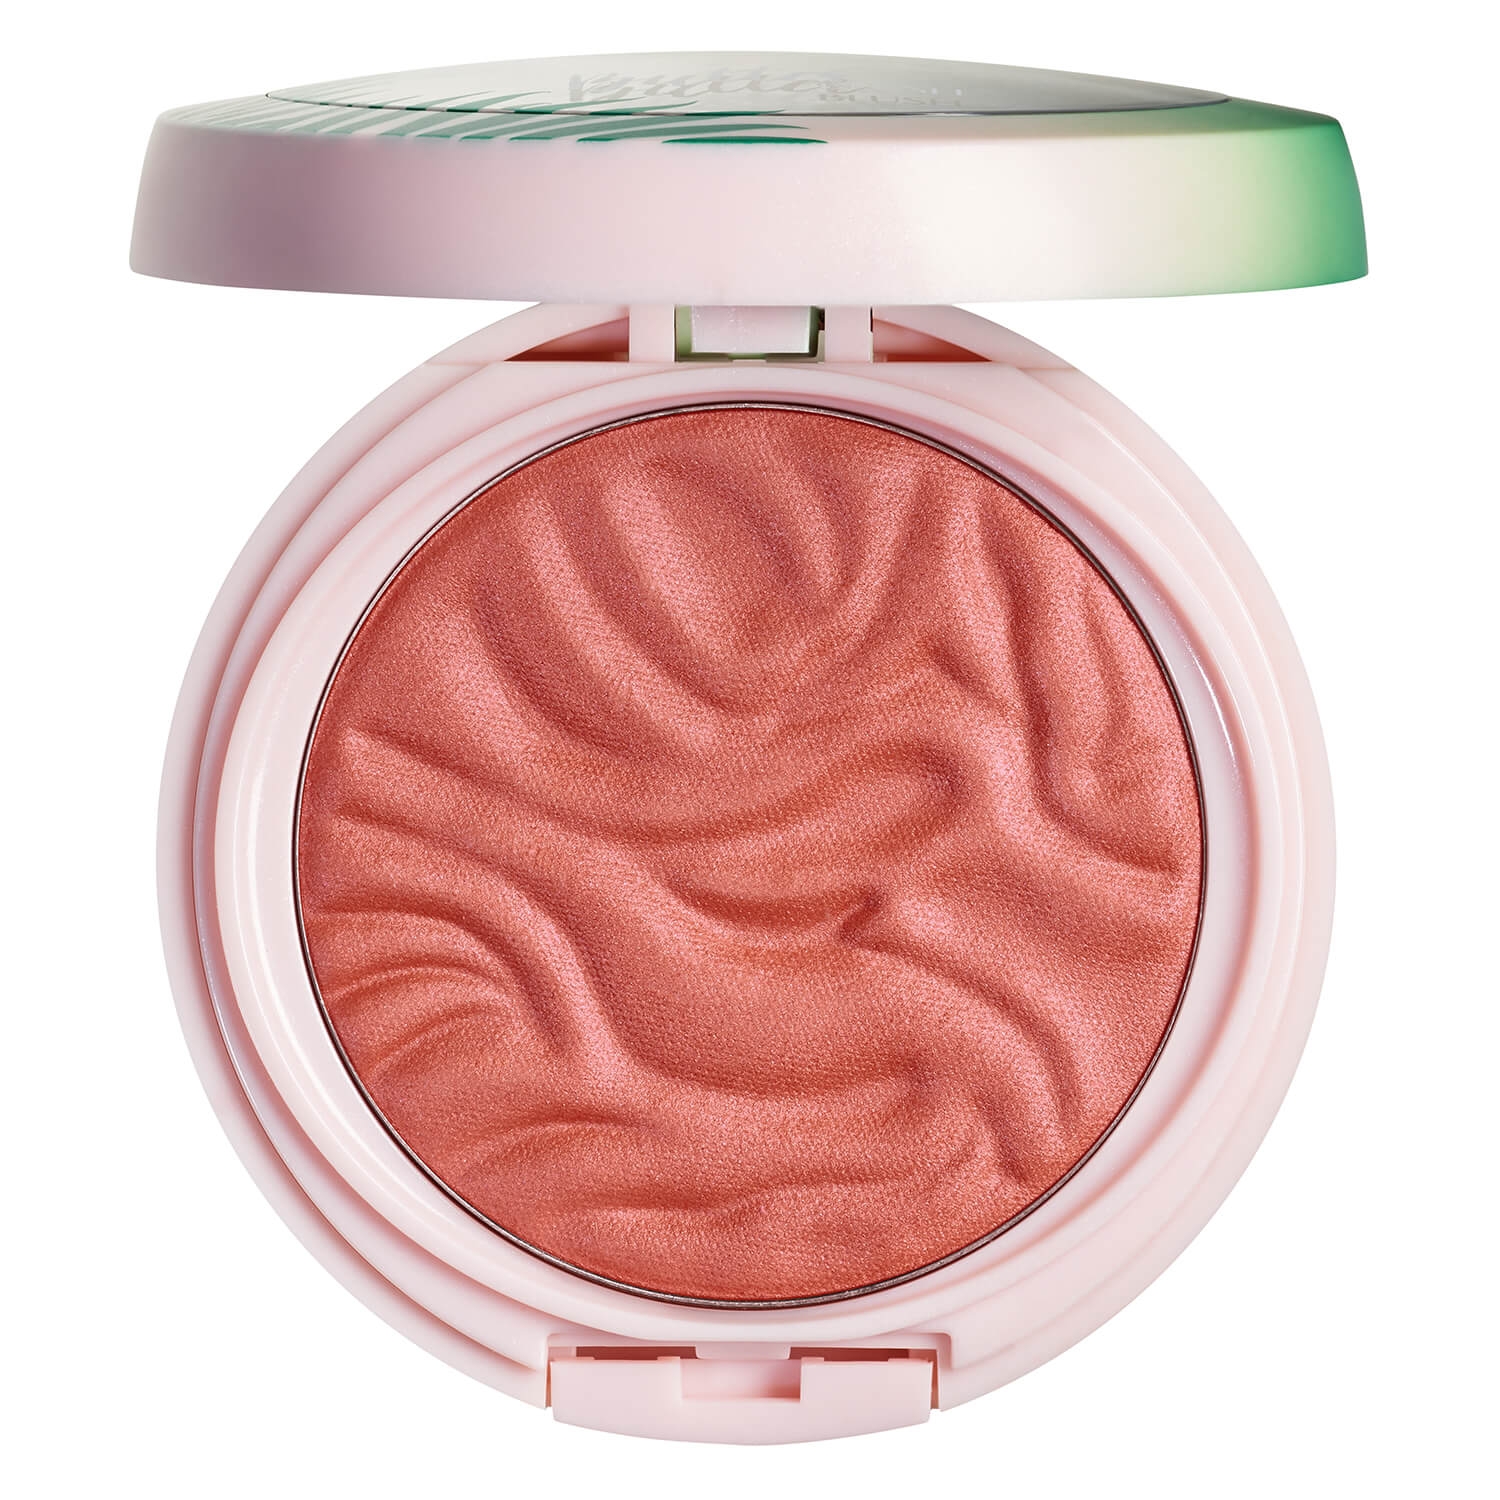 Product image from PHYSICIANS FORMULA - Butter Blush Copper Cabana